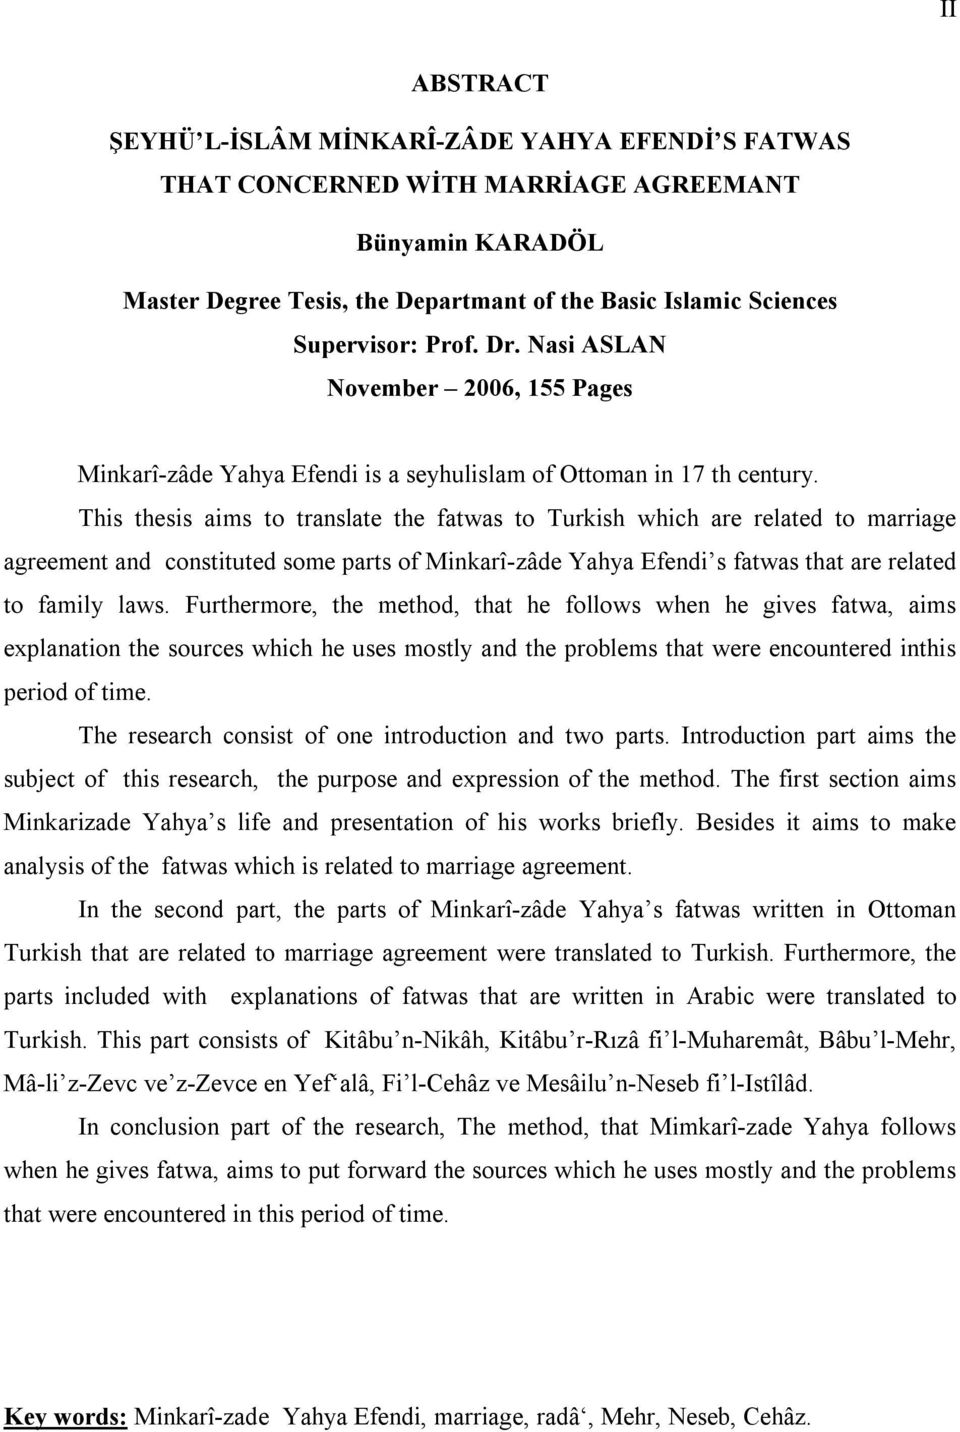 This thesis aims to translate the fatwas to Turkish which are related to marriage agreement and constituted some parts of Minkarî-zâde Yahya Efendi s fatwas that are related to family laws.